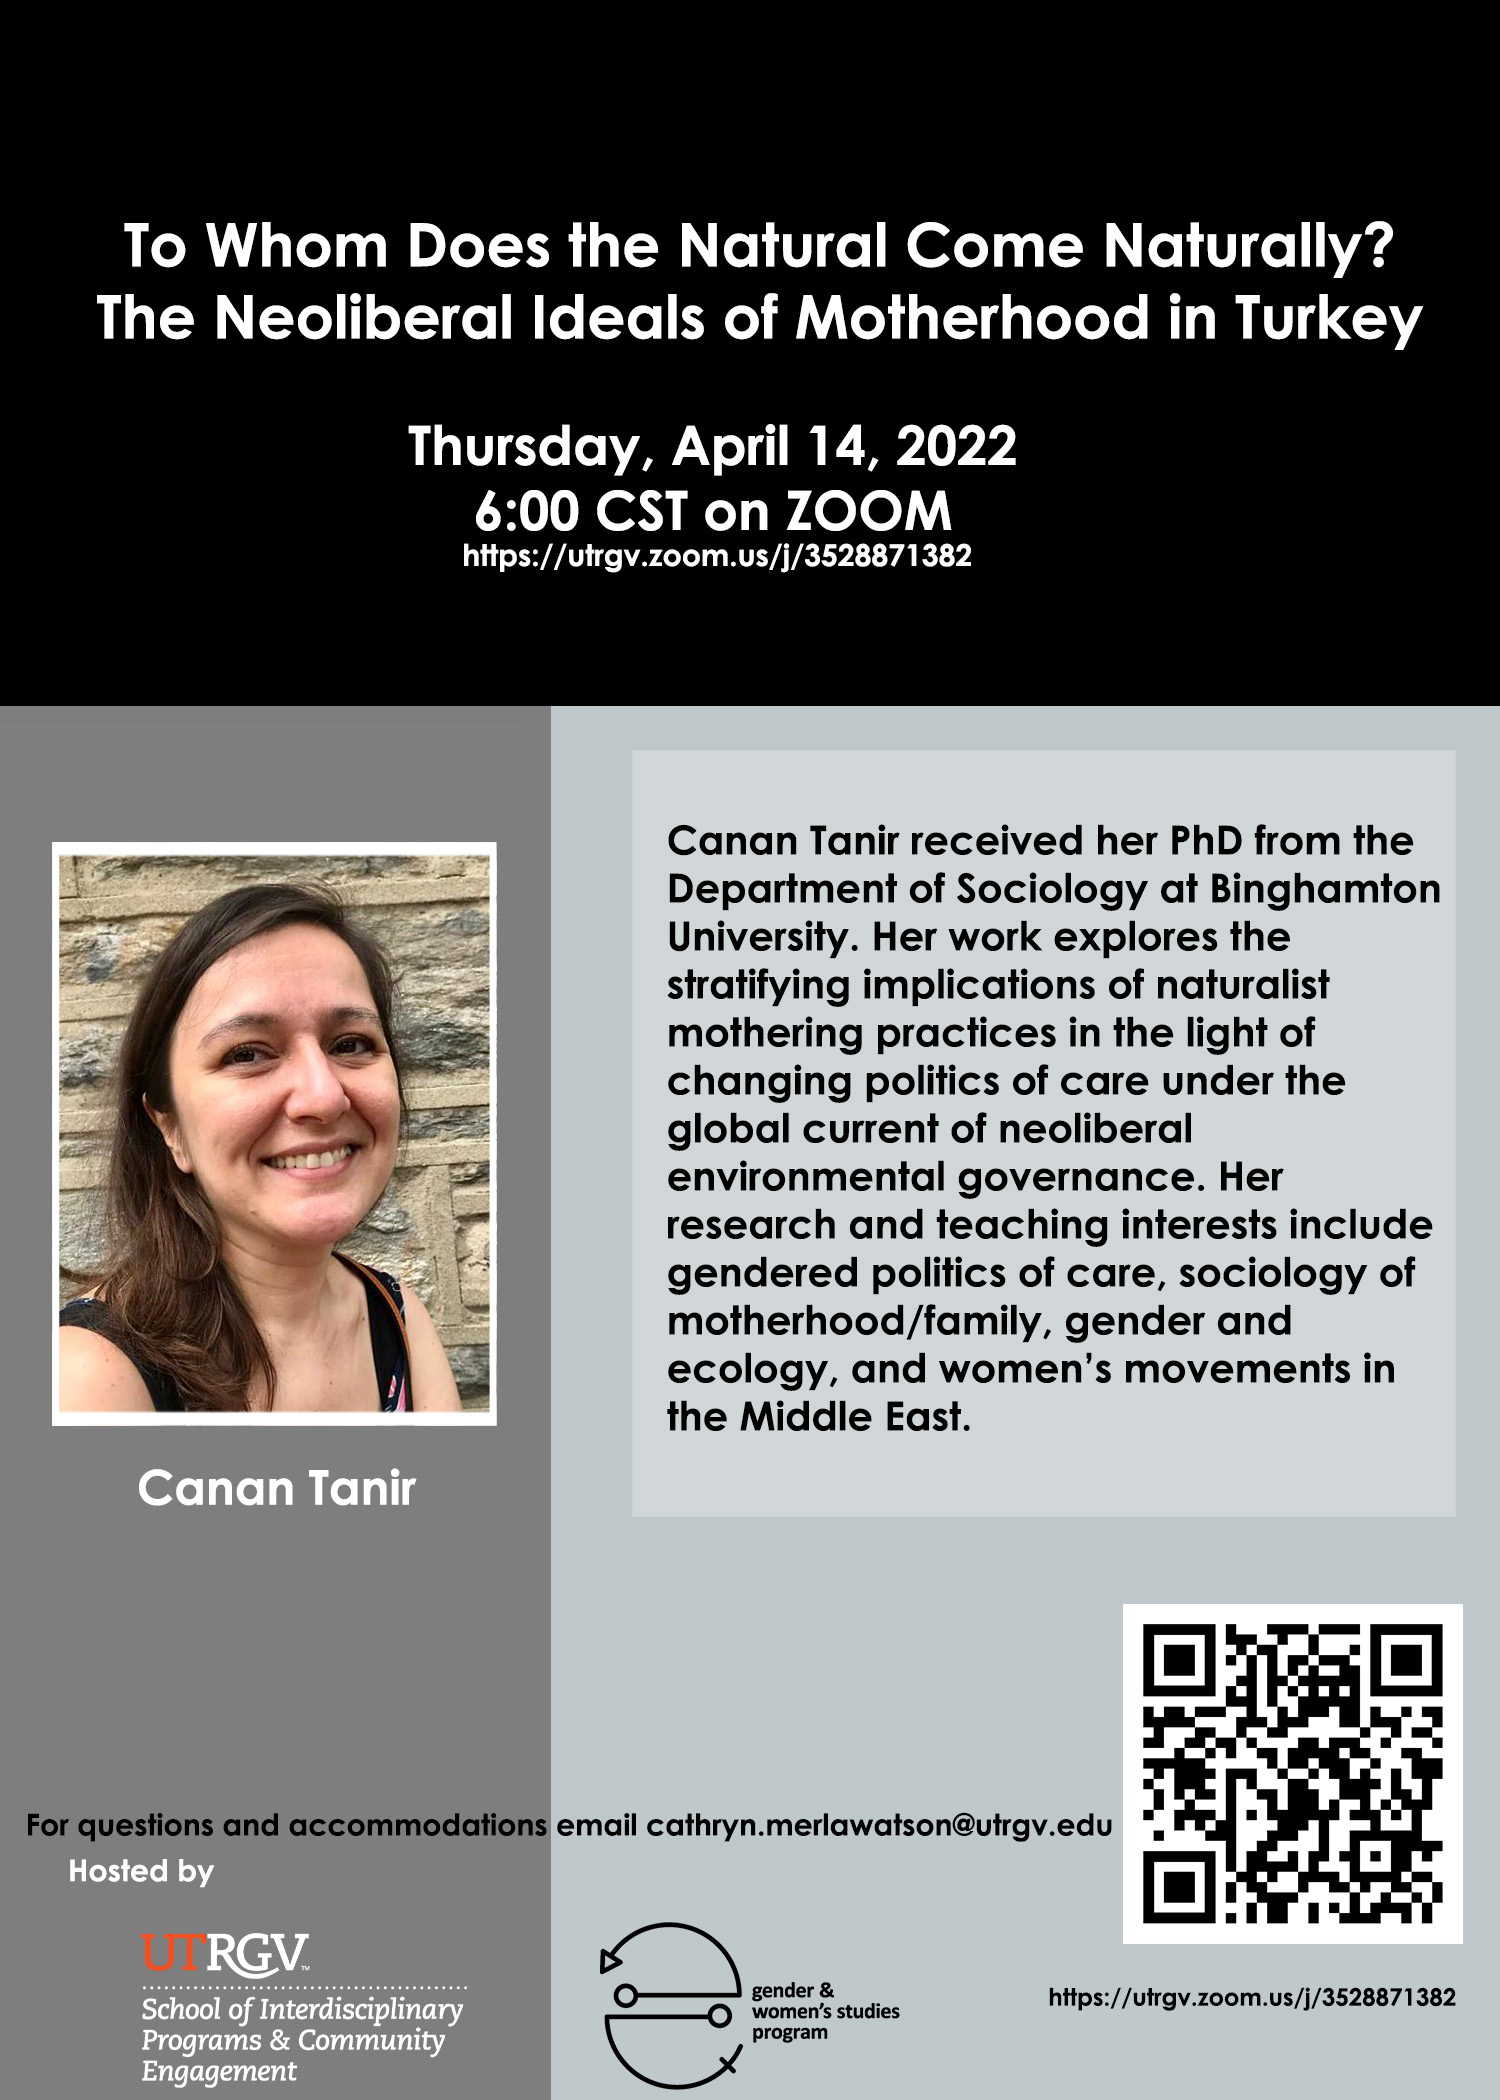 To Whom Does the Natural Come Naturally? The Neoliberal Ideals of Motherhood in Turkey